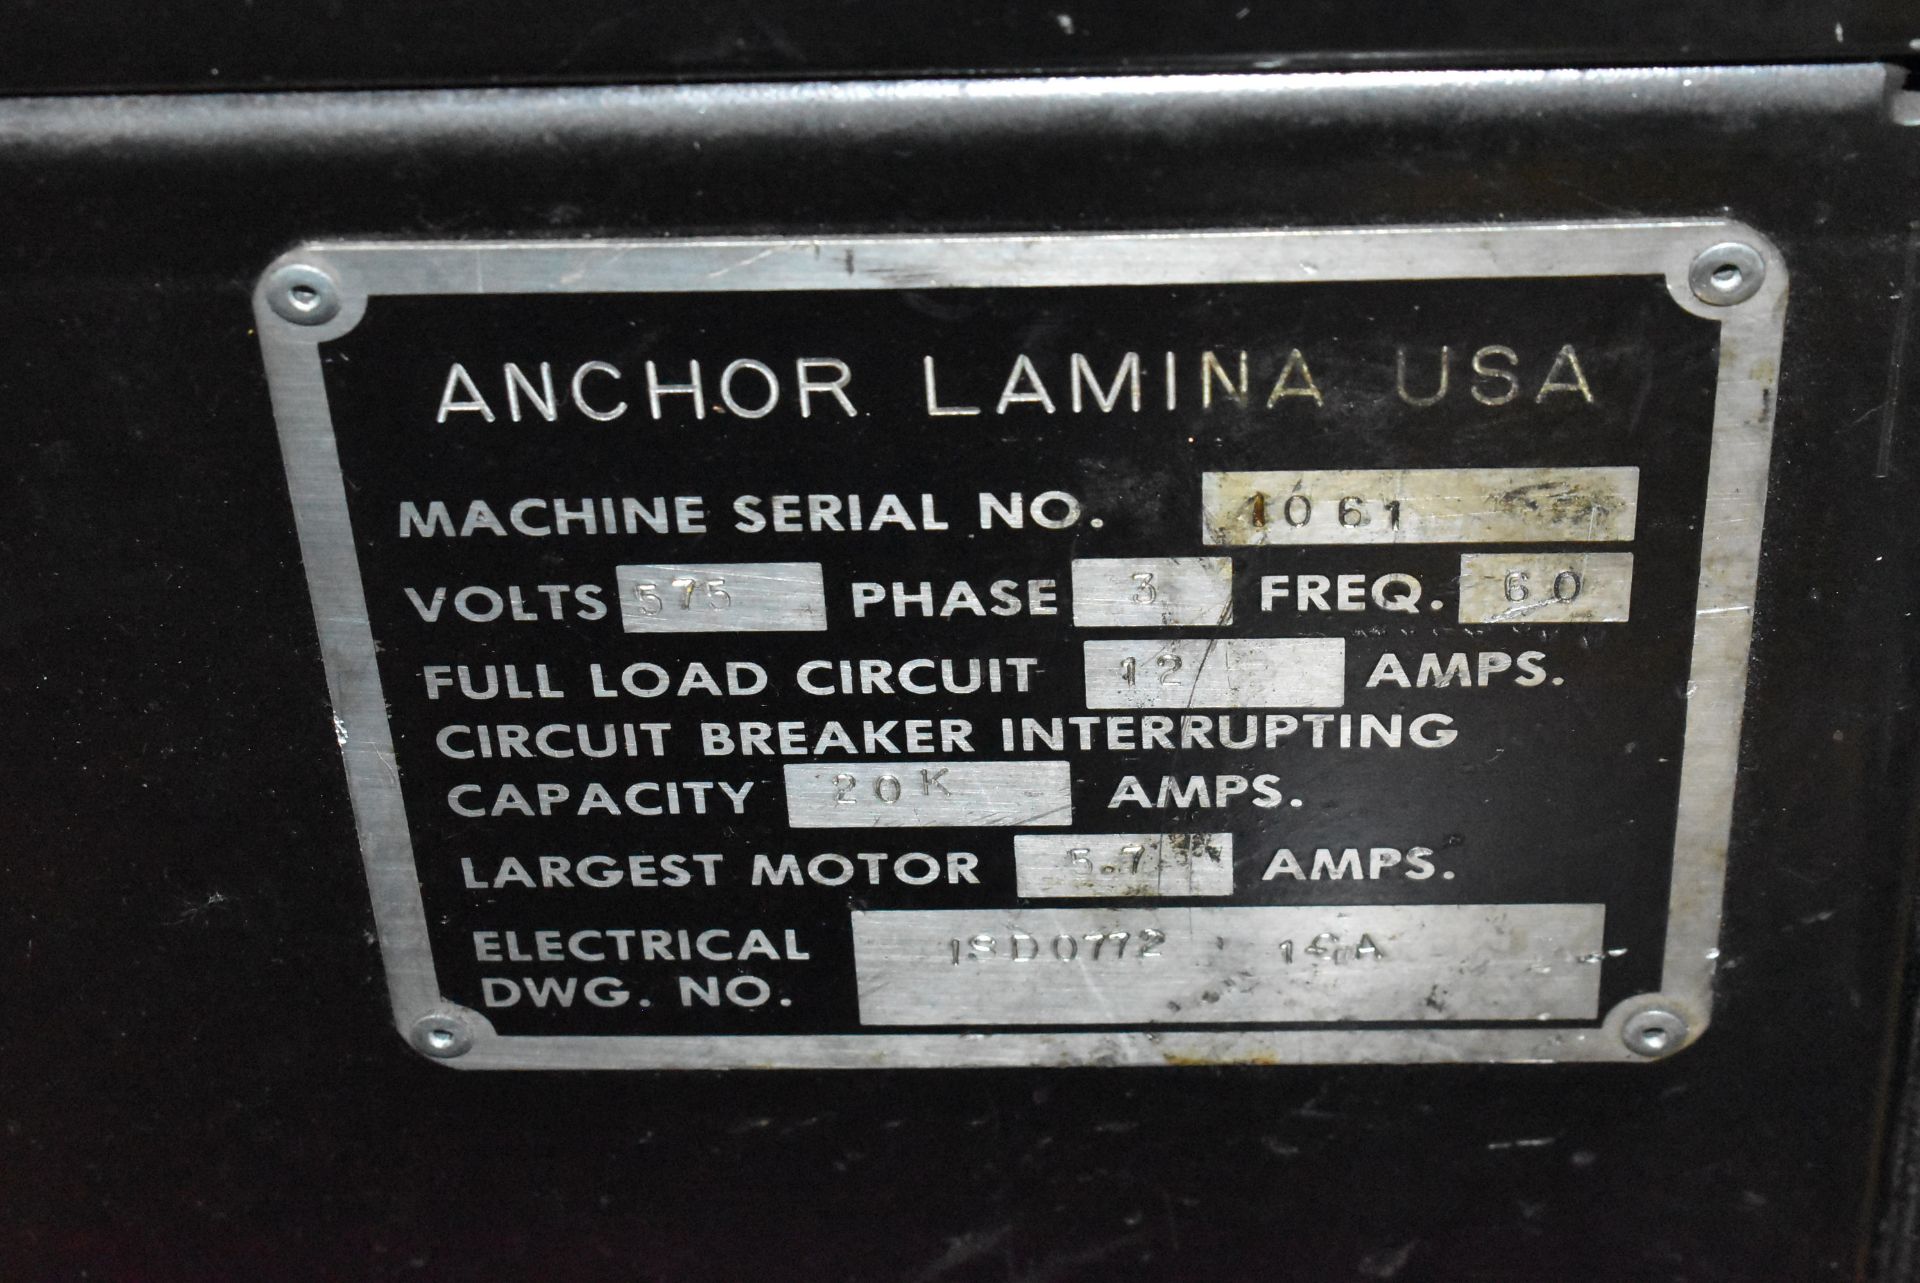 ANCHOR LAMINA HYDRAULIC DIE SETTER WITH E300 DIGITAL MICROPROCESSOR CONTROL, (4) HYDRAULIC LIFT - Image 5 of 5